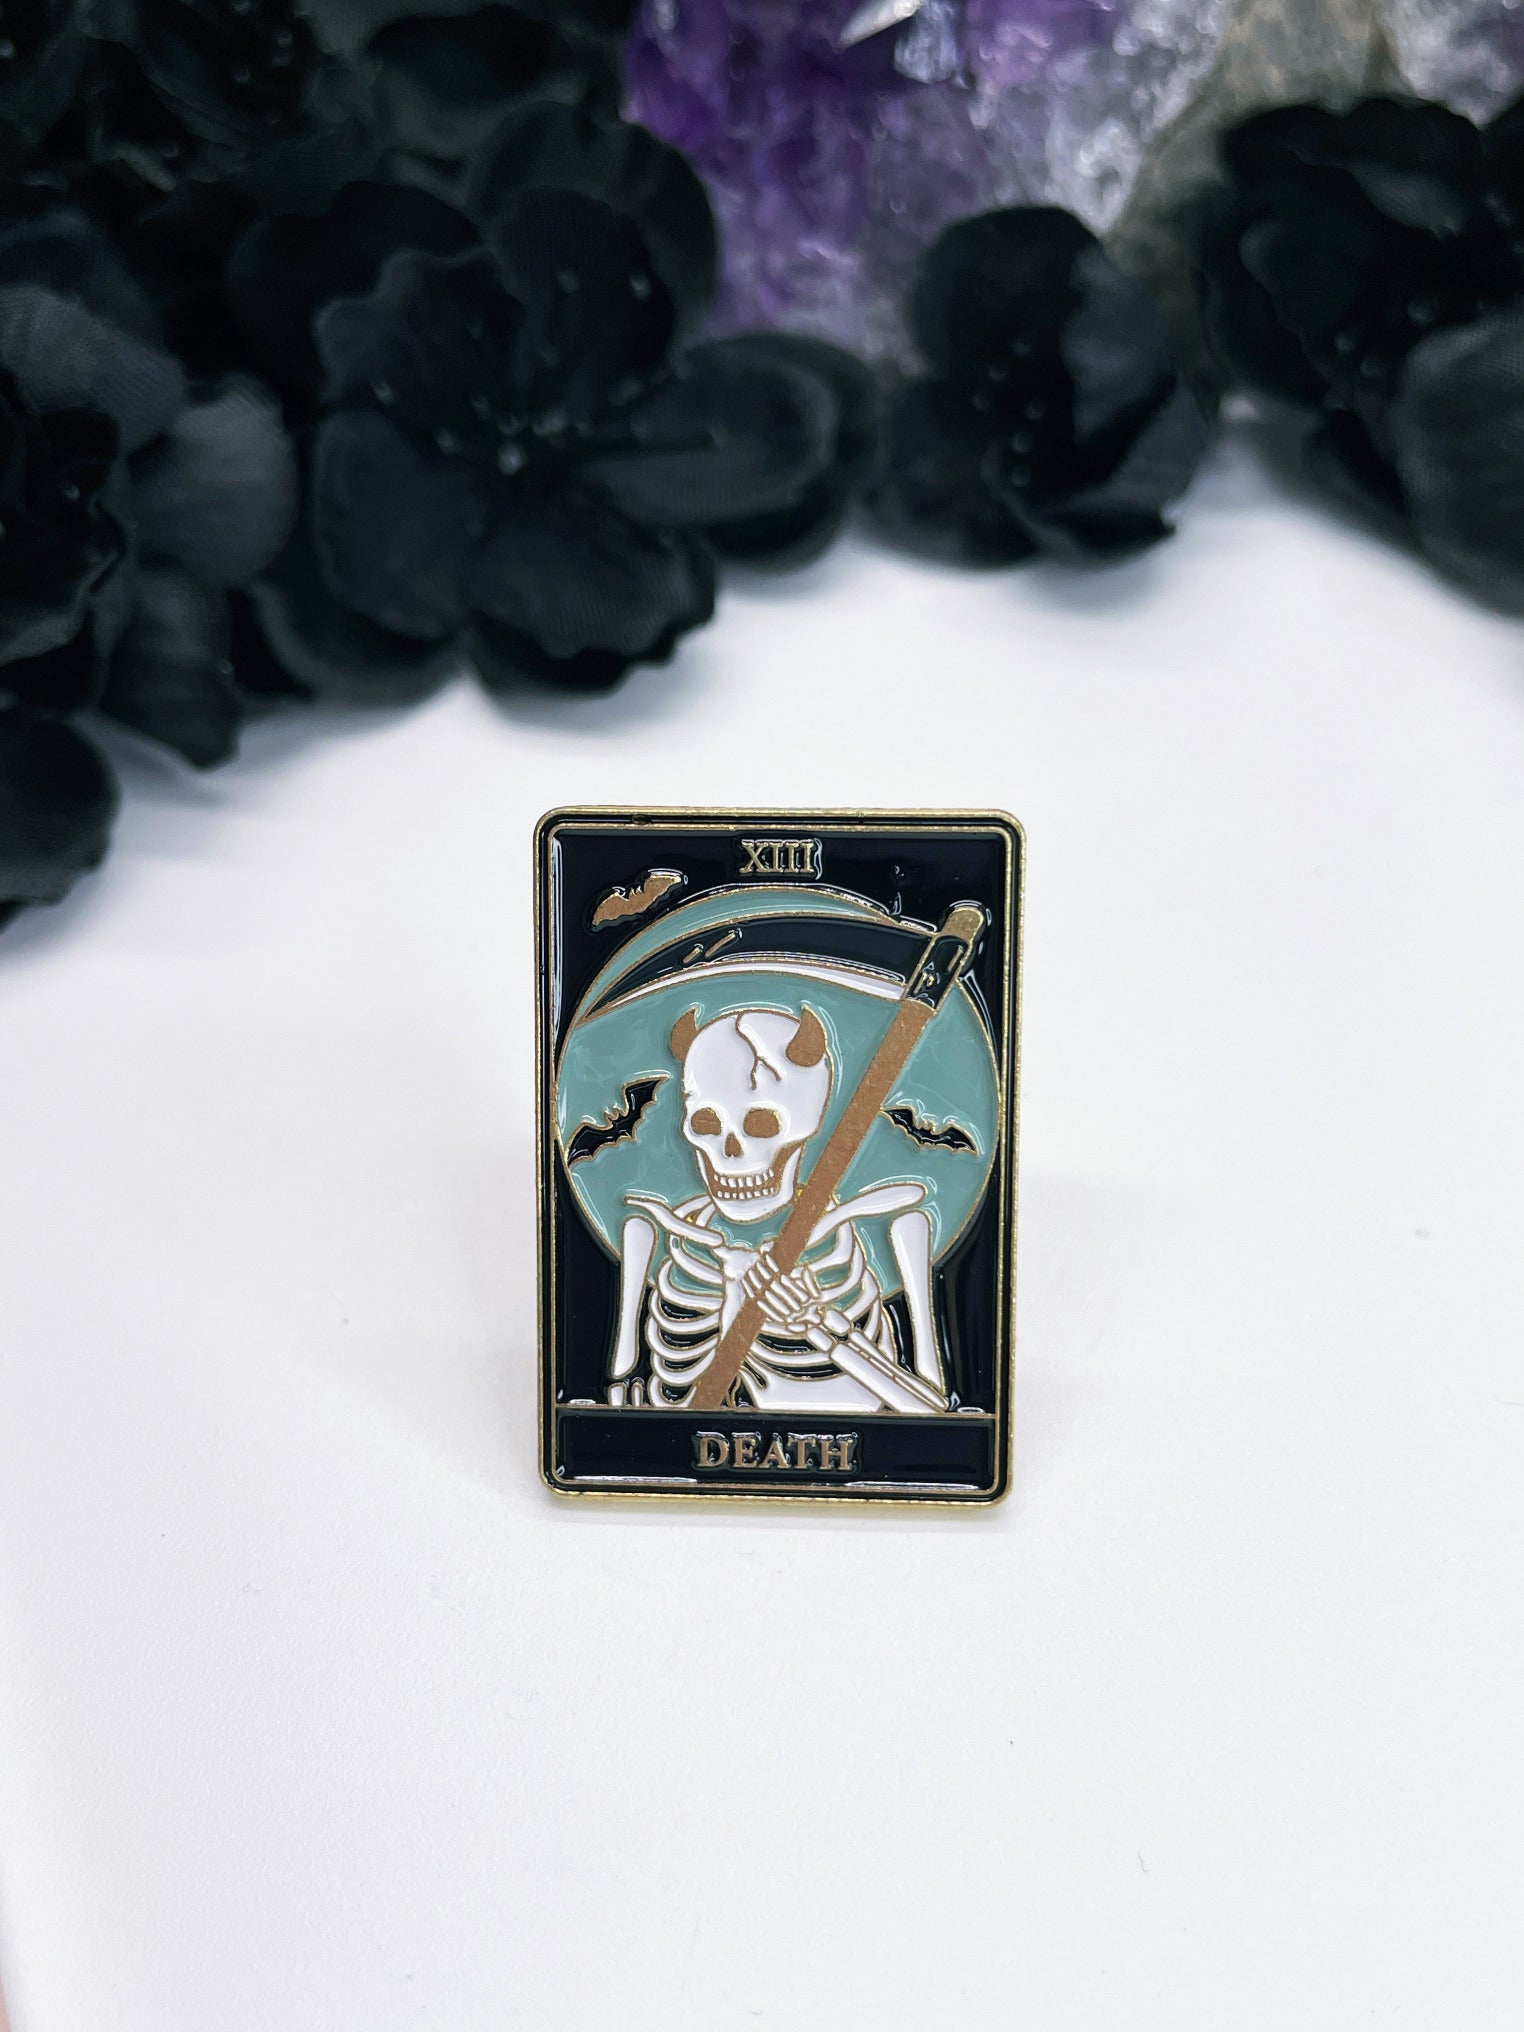 An image of an enamel pin featuring the Tarot card "Death" and a stylized skeleton with a reaper on it.